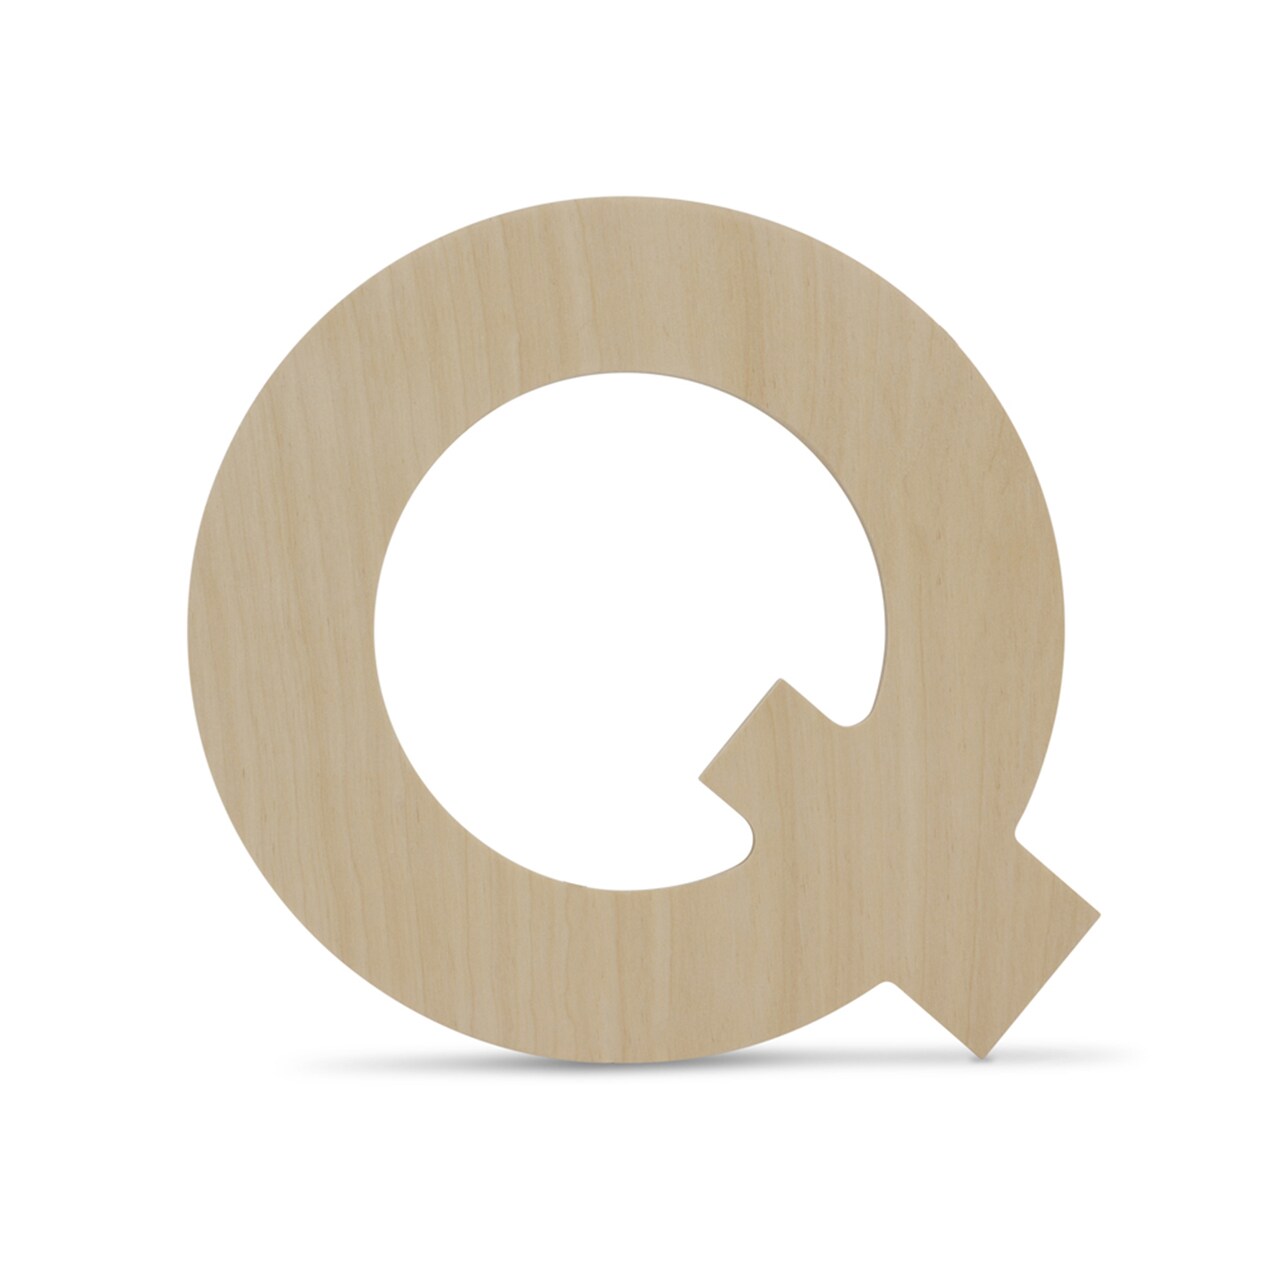 Wooden Letter Q 12 inch or 8 inch, Unfinished Large Wood Letters for Crafts | Woodpeckers